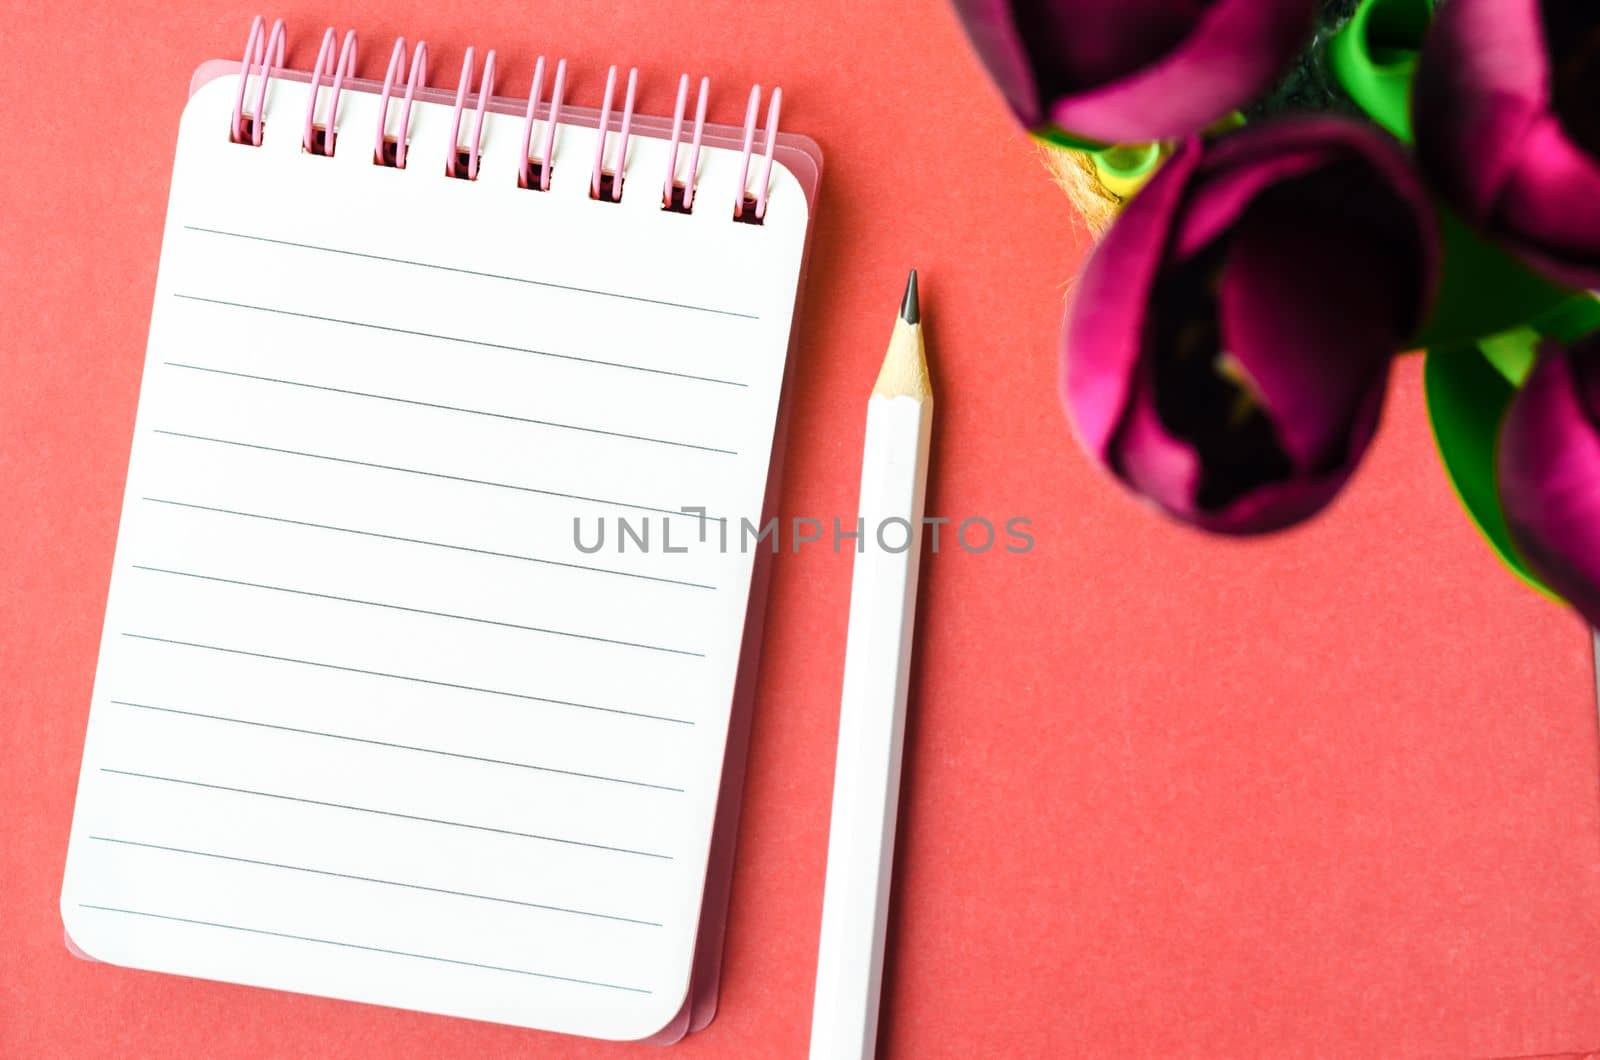 An open spiral bound notebook with lined paper and pencil with red tulip flower on red background. by Gamjai